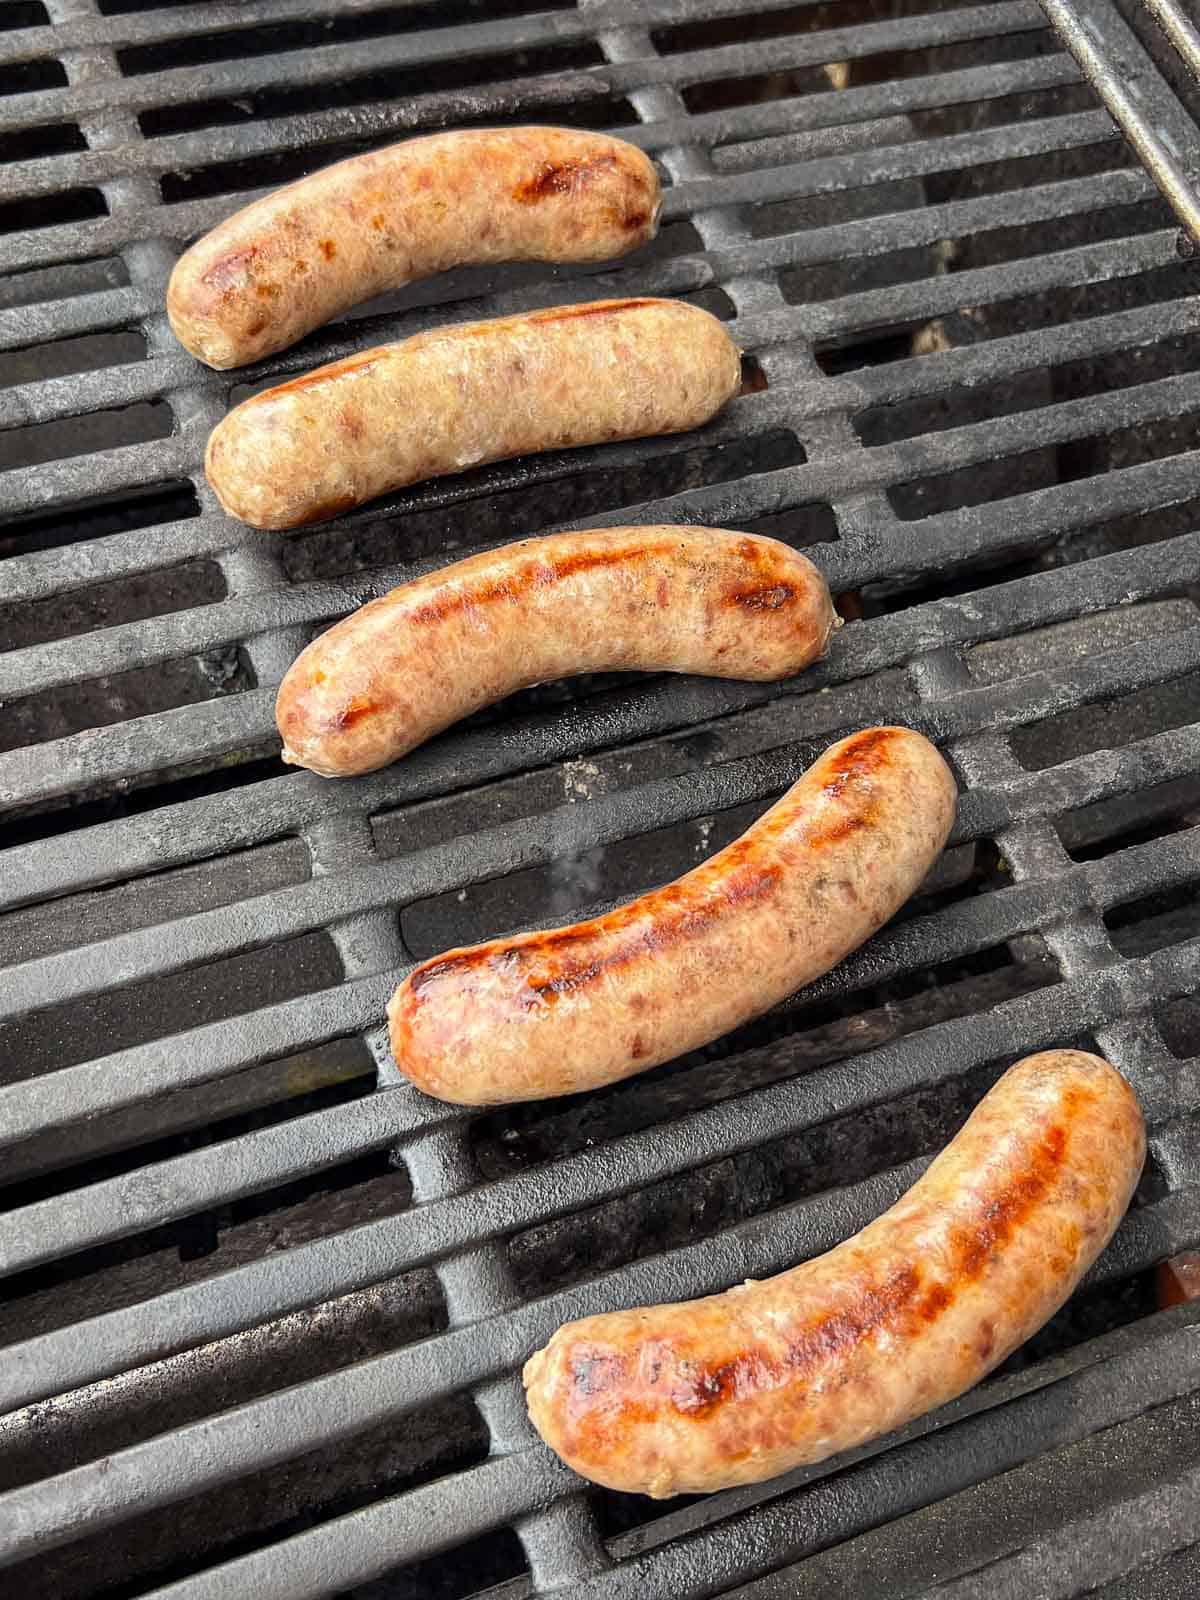 5 brats with grill marks on the grill.